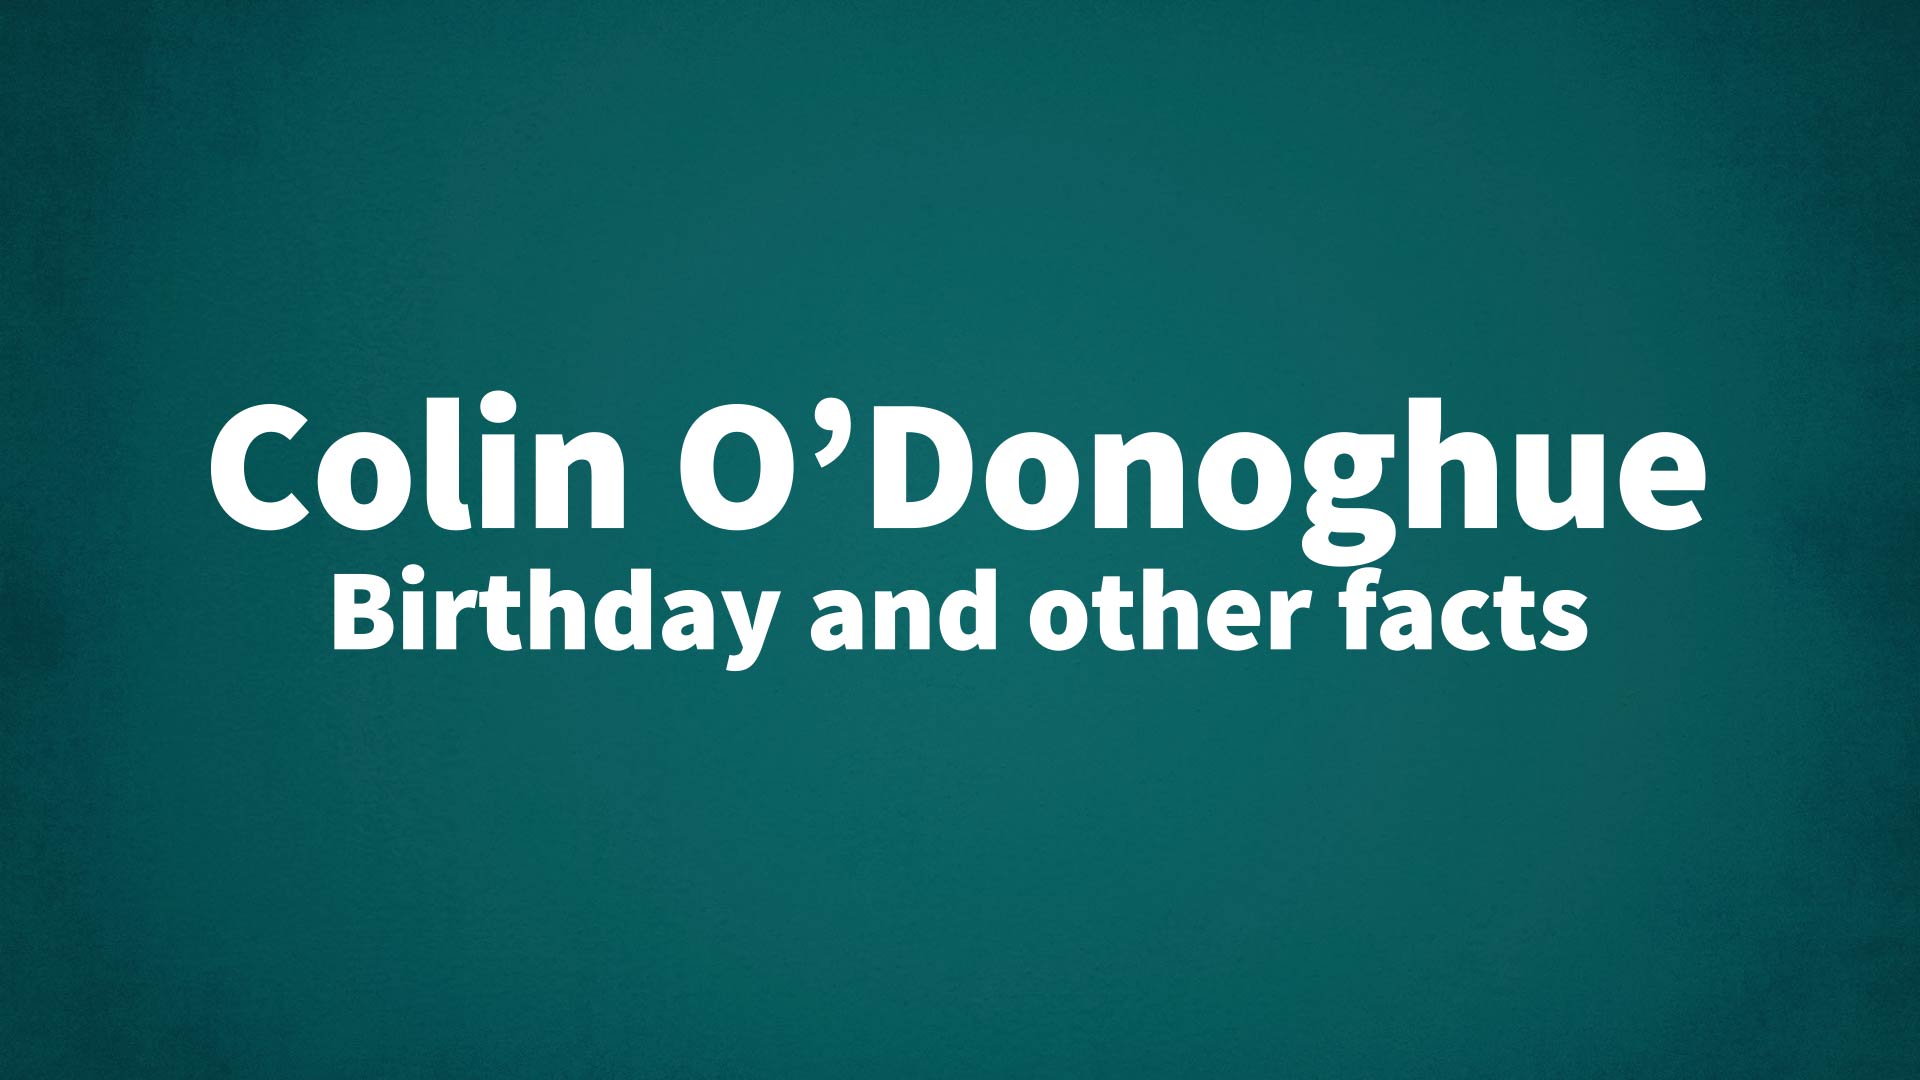 title image for Colin O’Donoghue birthday